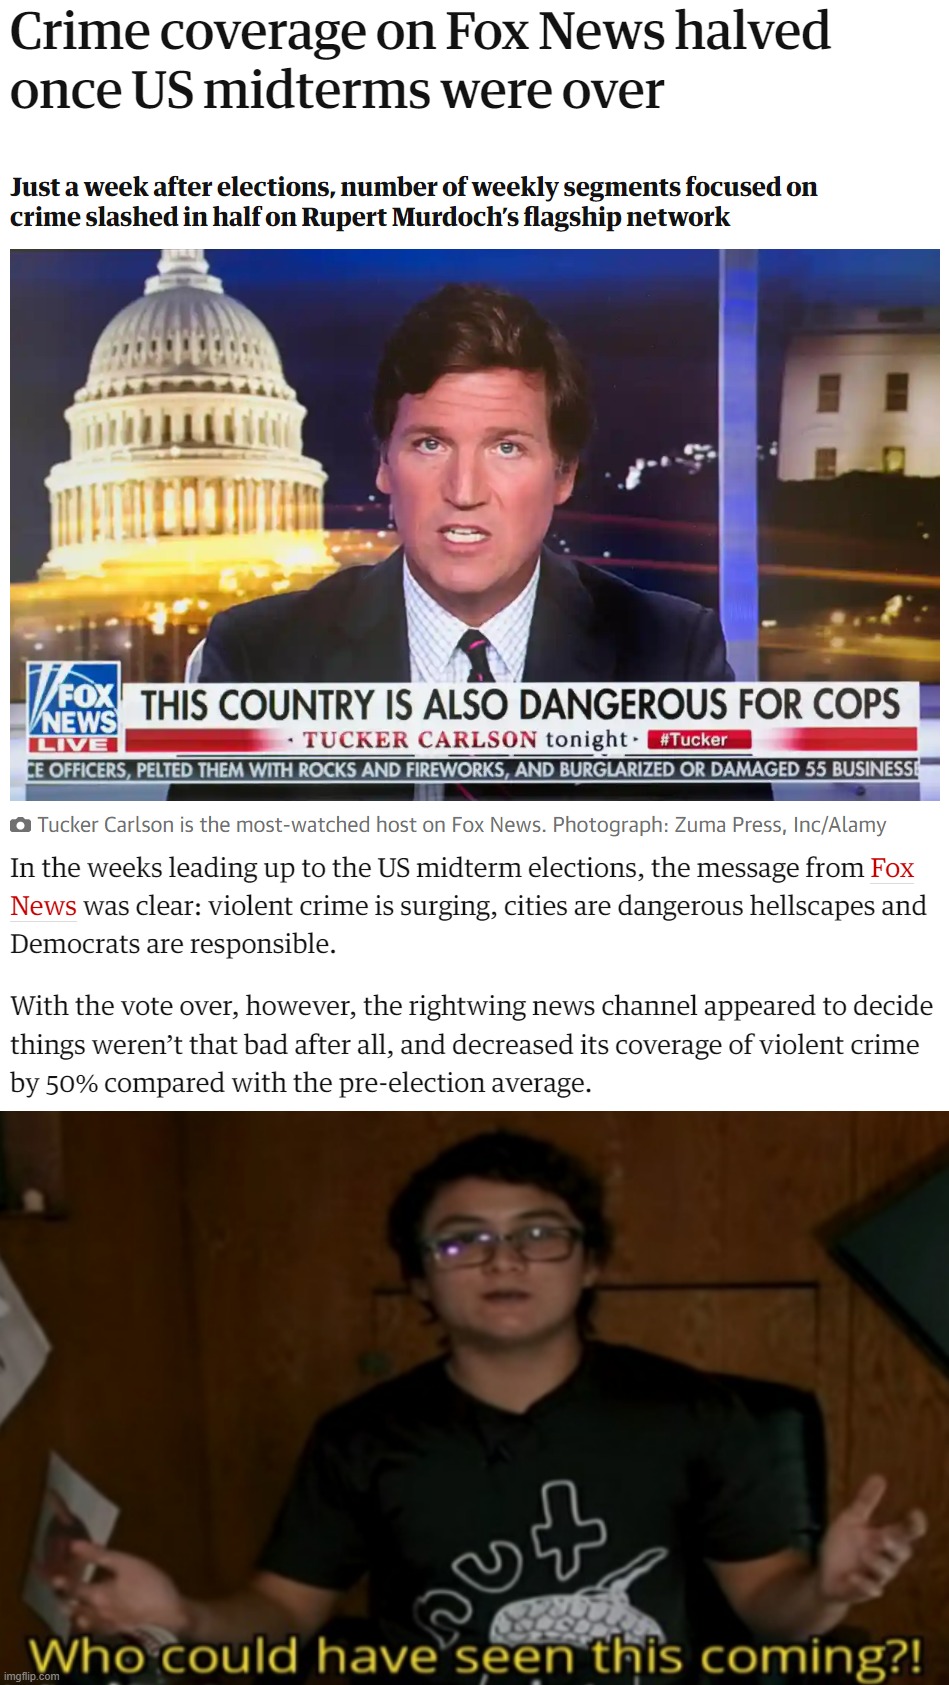 Man, it's almost like Fox's coverage of crime is based upon partisan need rather than any actual trends | image tagged in crime coverage fox news 2022 midterms,who could have seen this coming,fox news,propaganda,midterms,crime | made w/ Imgflip meme maker